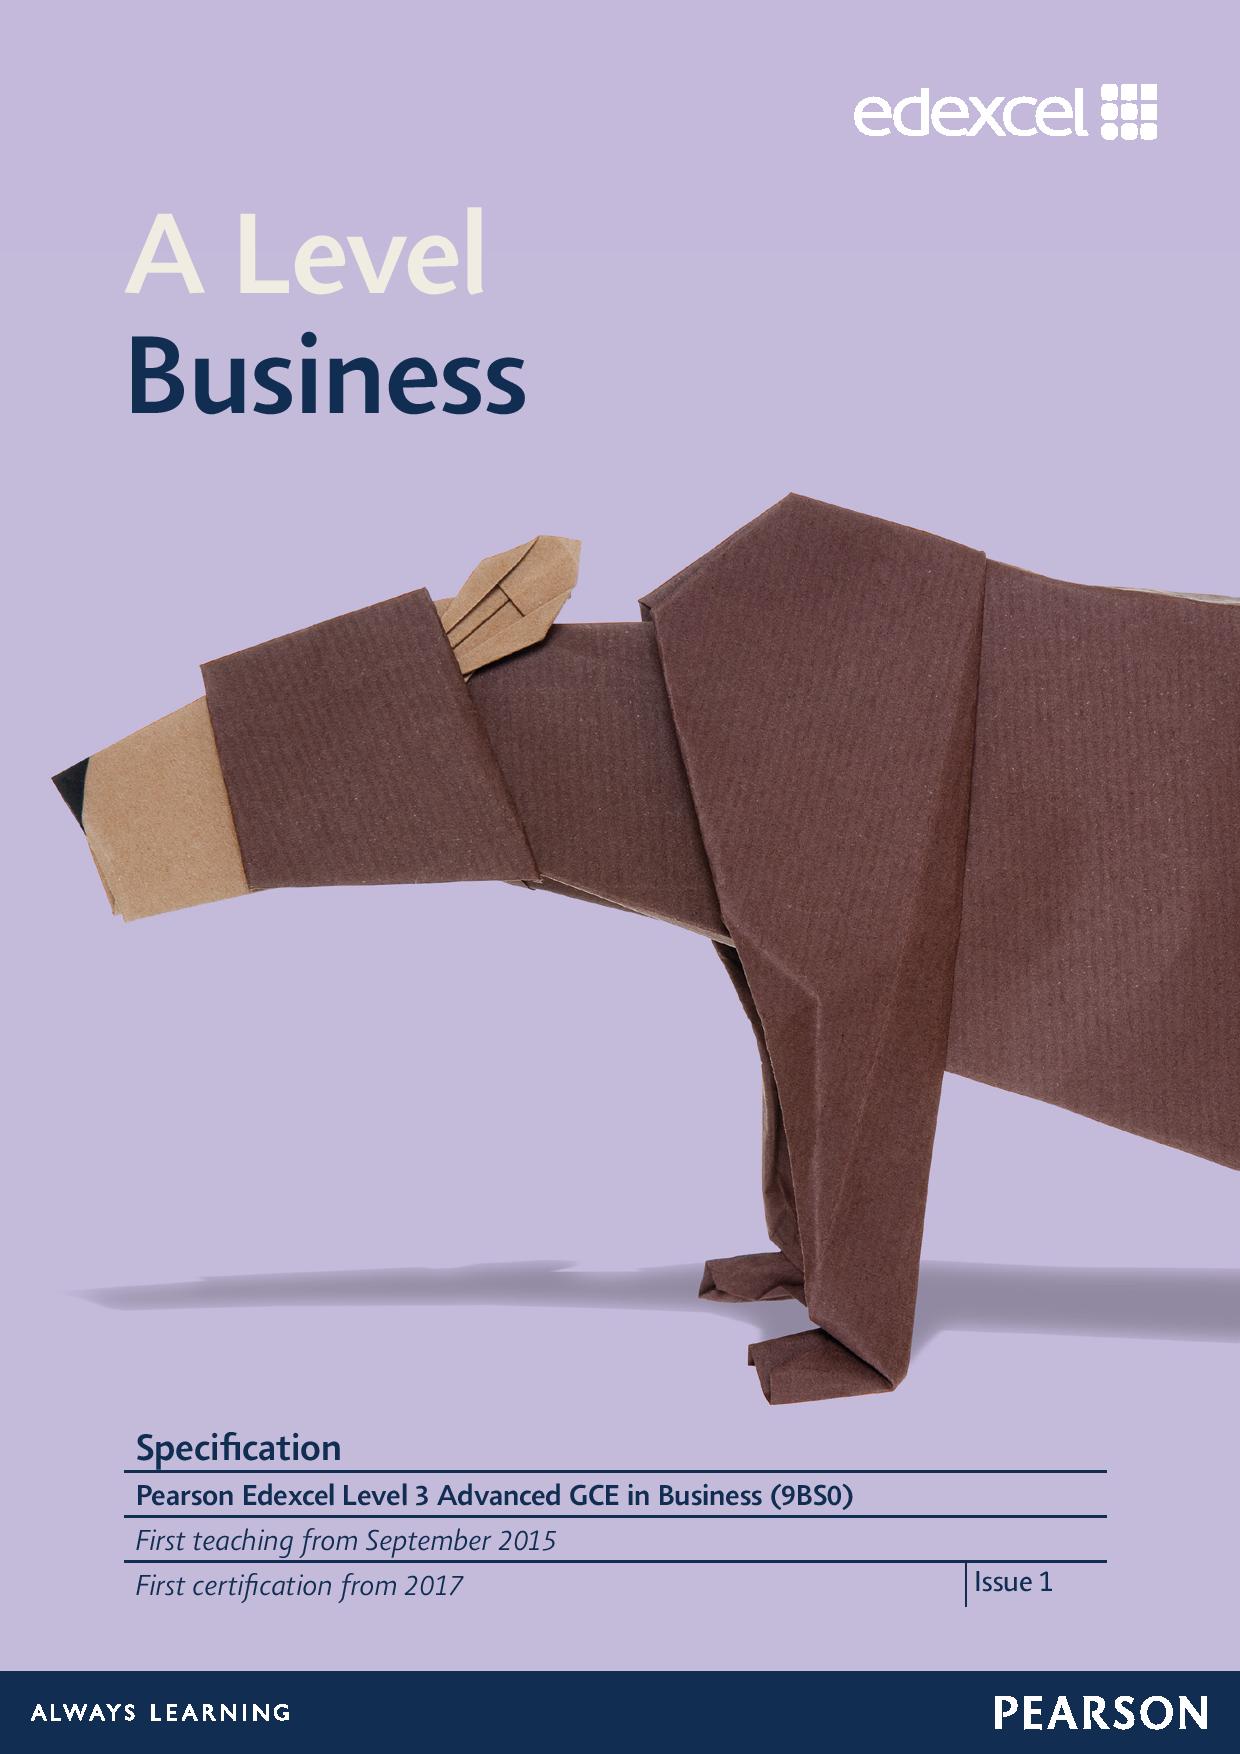 Link to Edexcel A level Business specification page